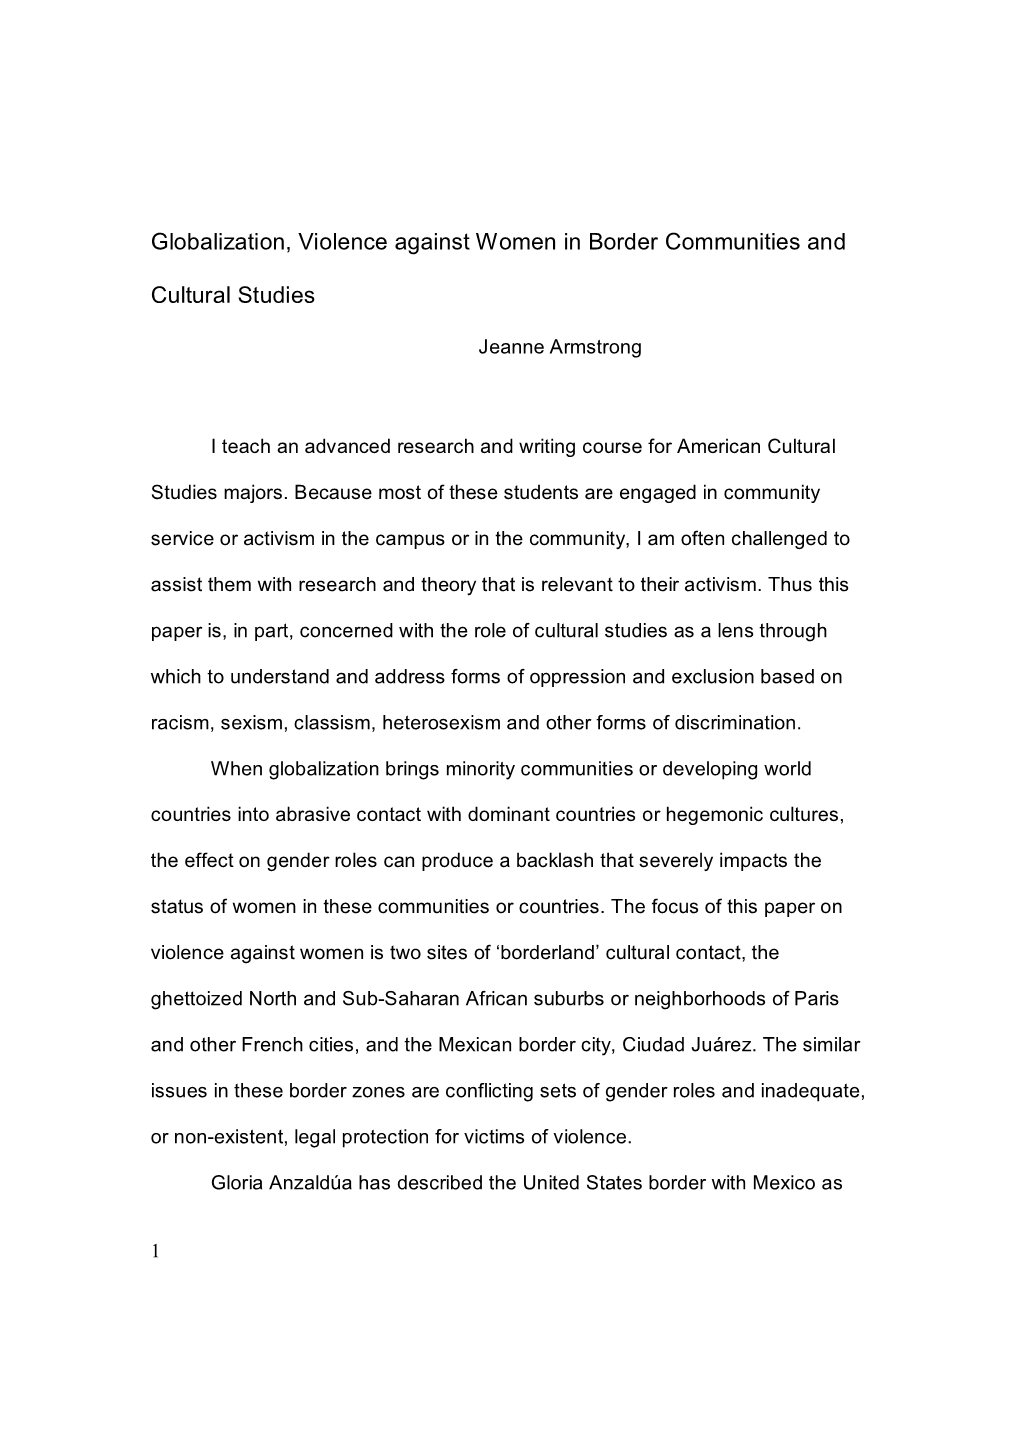 Globalization, Violence Against Women in Border Communities And